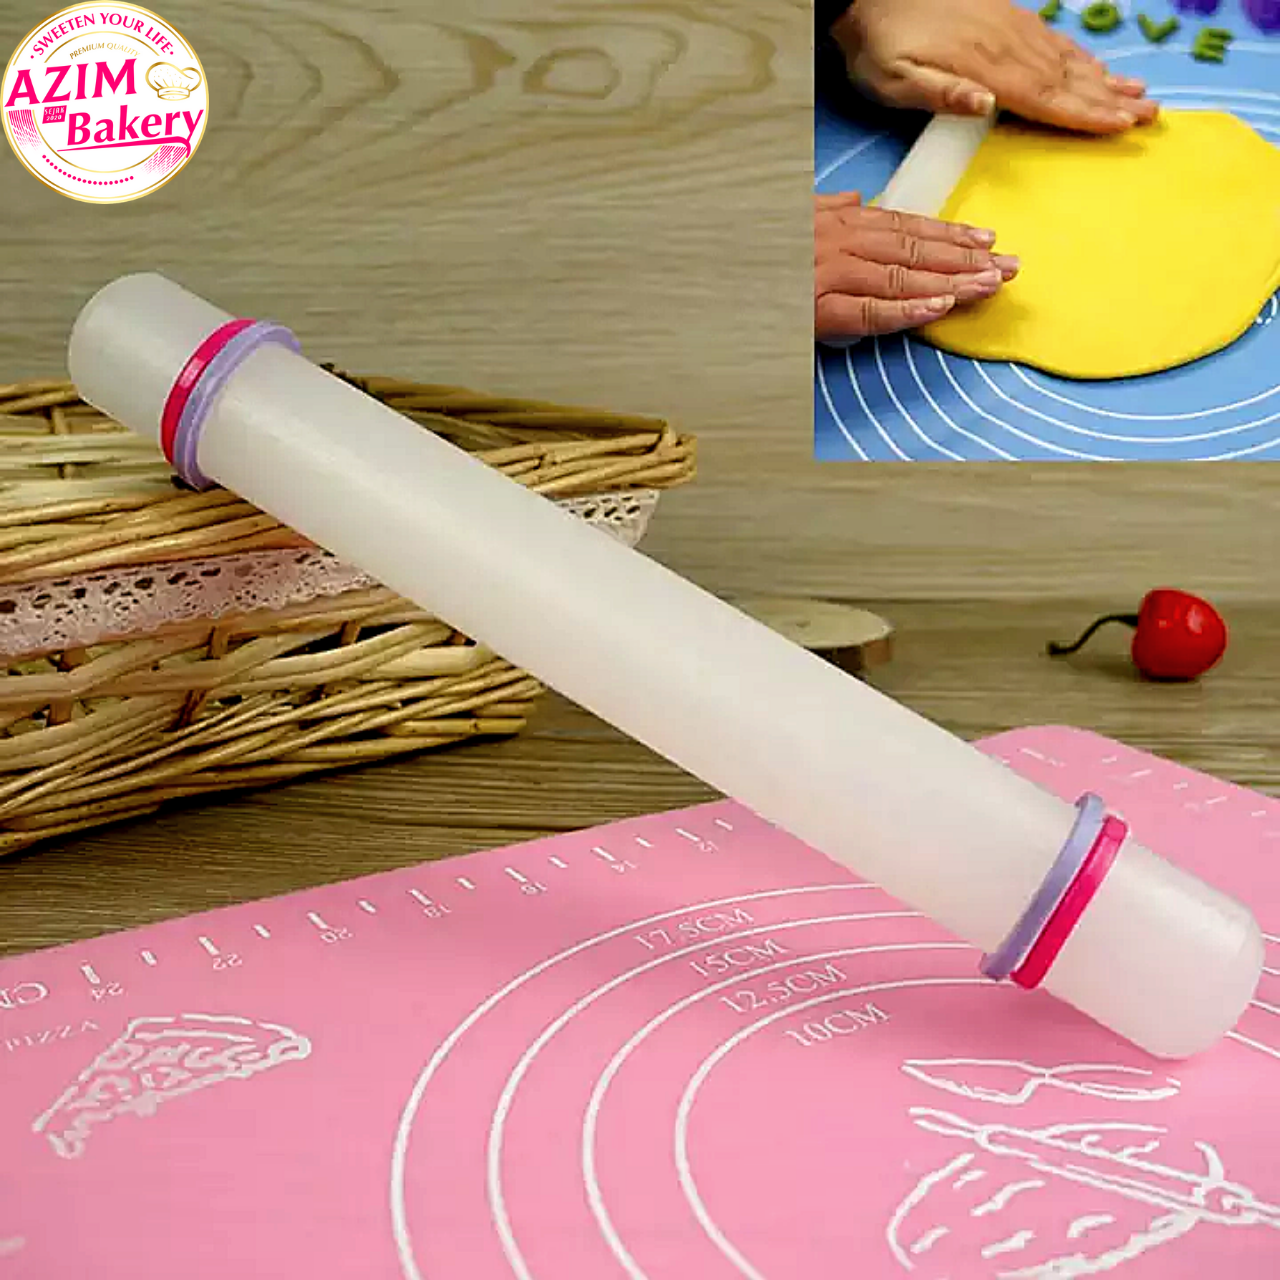 Fondant Rolling Pin with Rings, 9inch Non Stick Plastic Rolling Pin Fondant  Cake Dough Roller DIY Baking Tool for Pizza, Pies, Pastries, Pasta